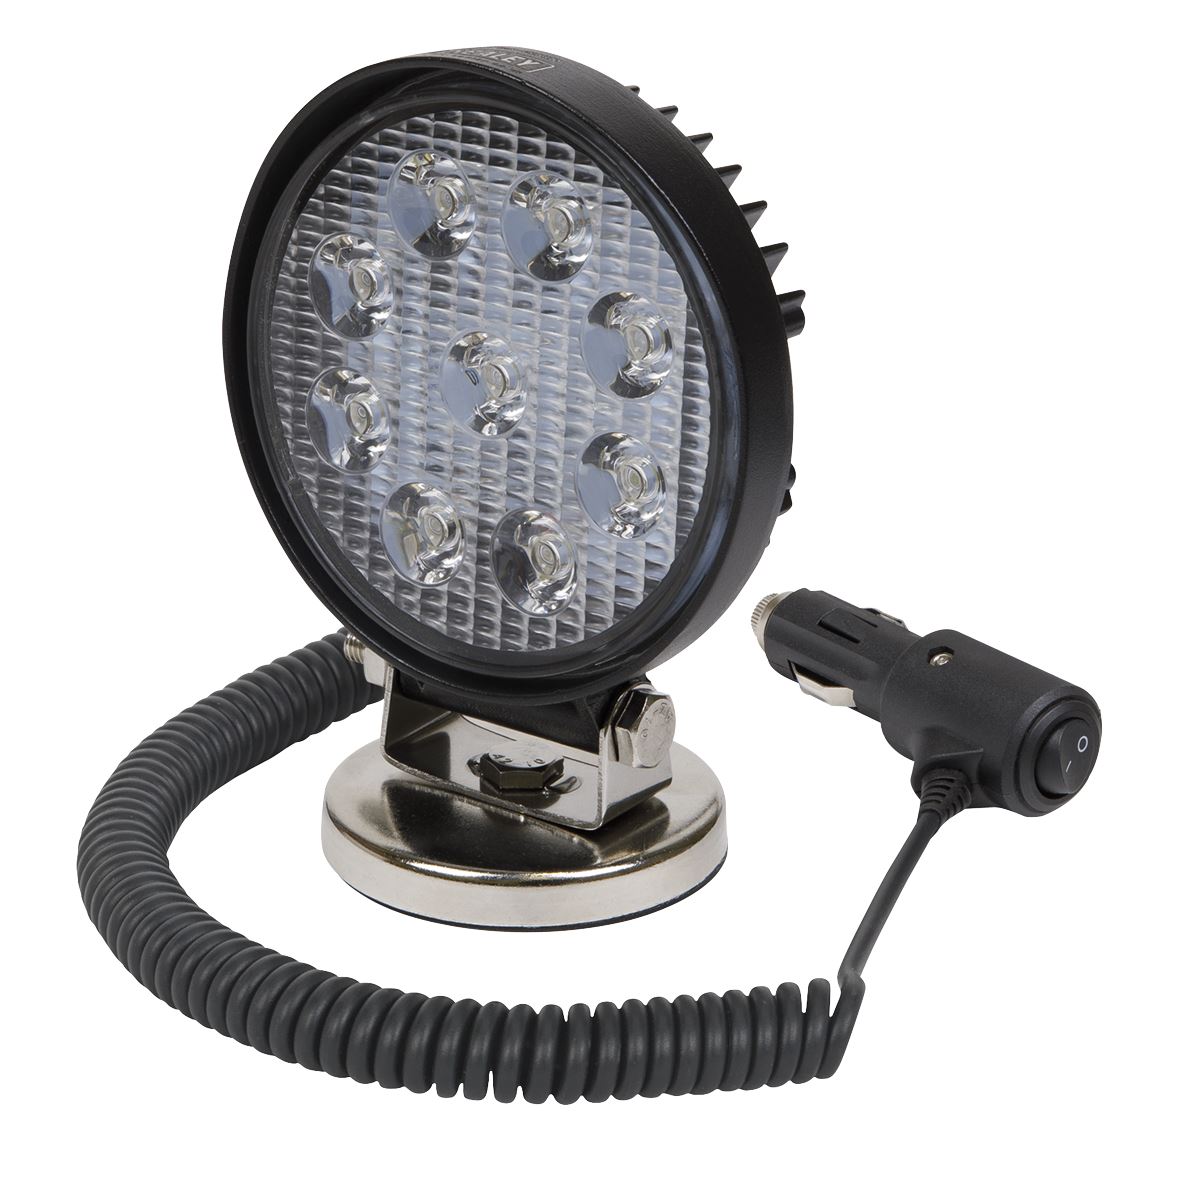 Sealey Round Worklight with Magnetic Base 27W SMD LED